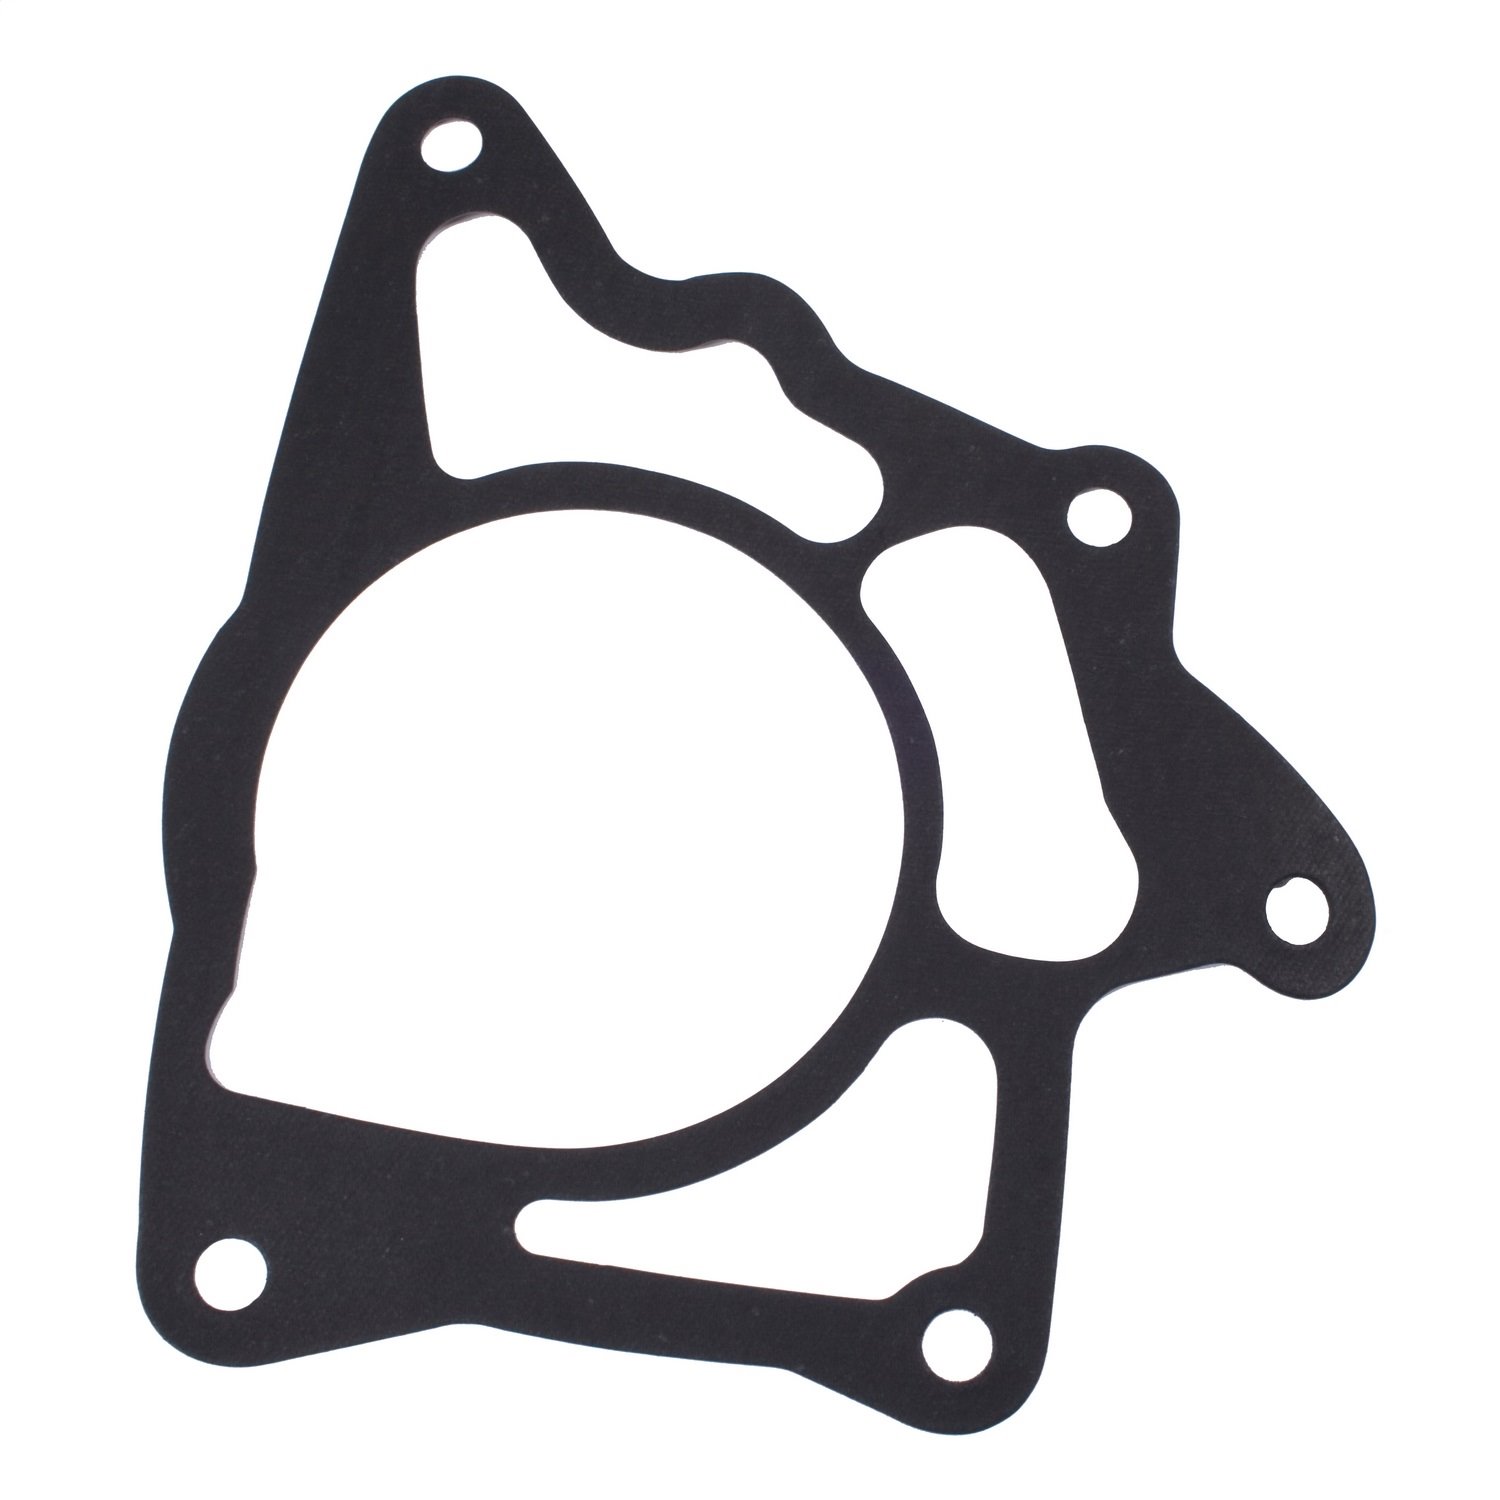 This transfer case gasket from Omix-ADA for Dana 20 transfer case between the transfer case and tran